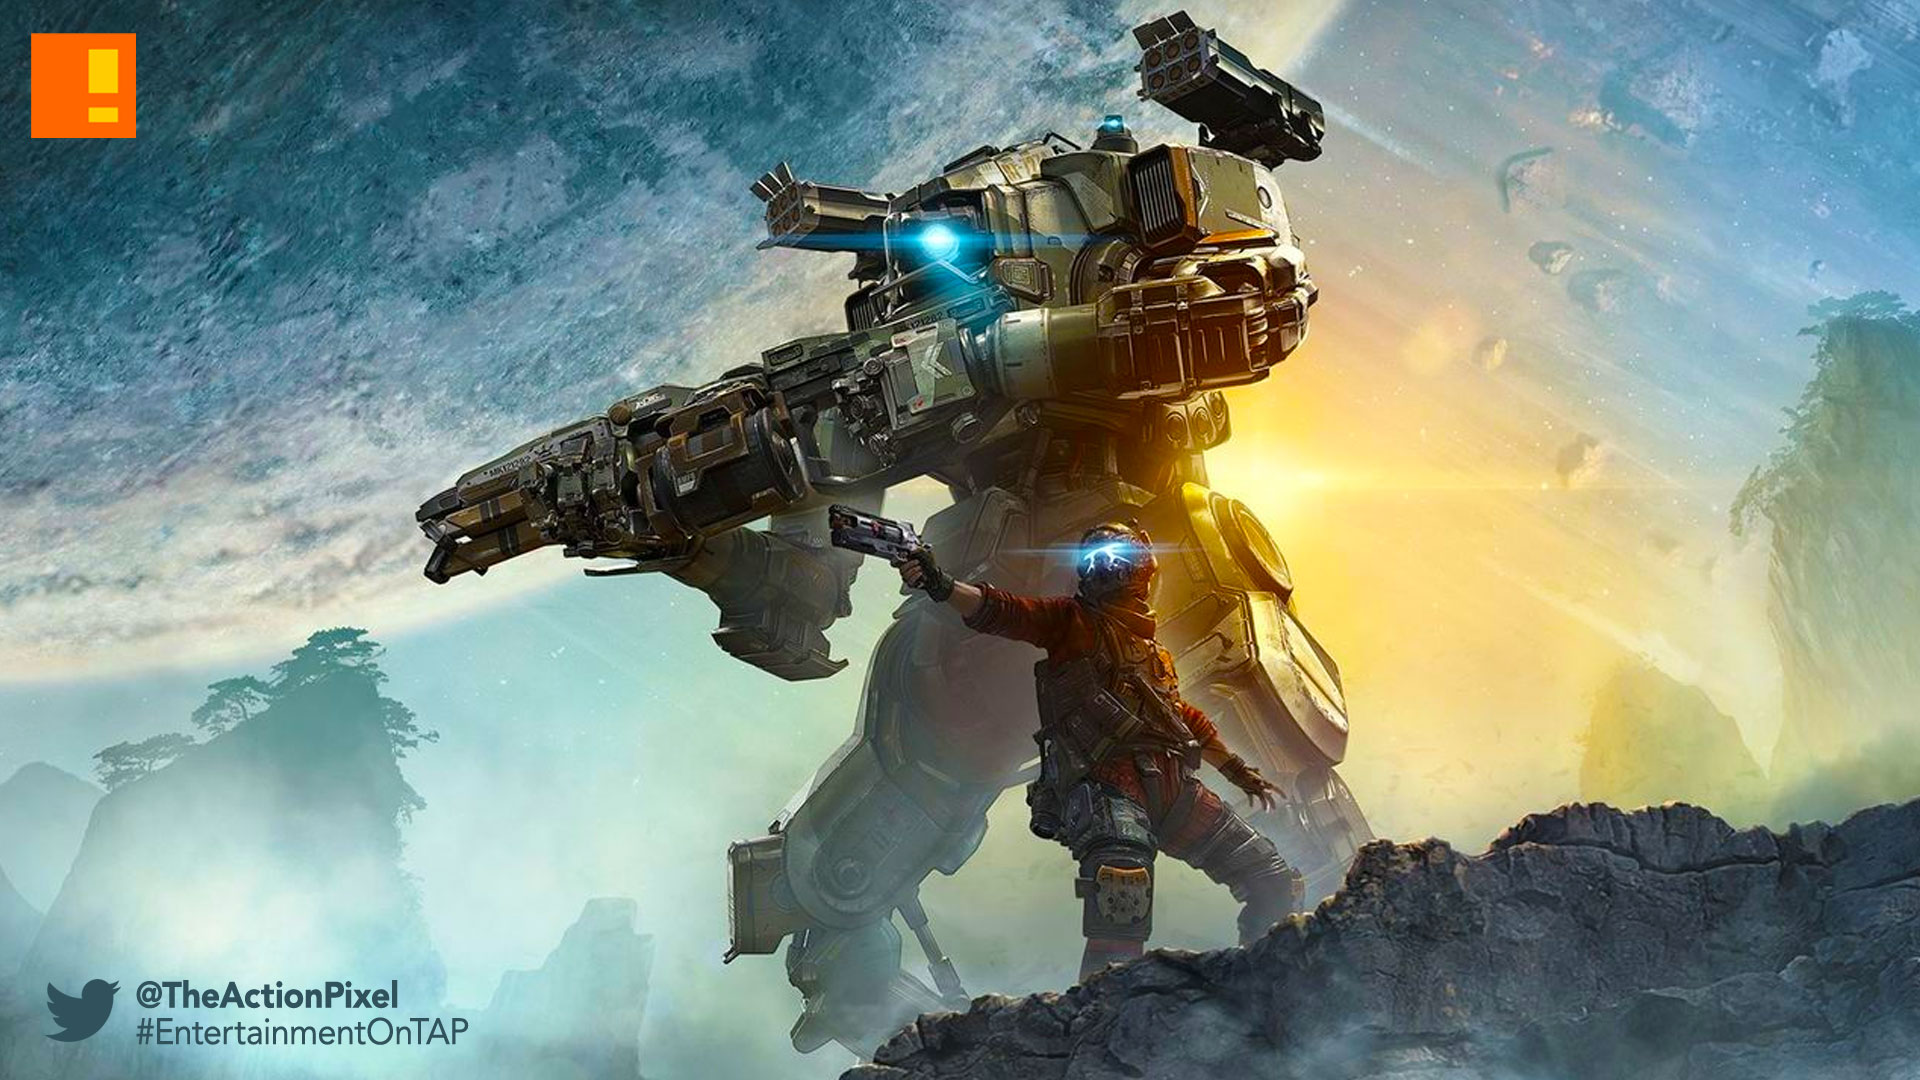 titanfall 2, respawn entertainment, the action pixel, single player, trailer, entertainment on tap, story mode, the action pixel